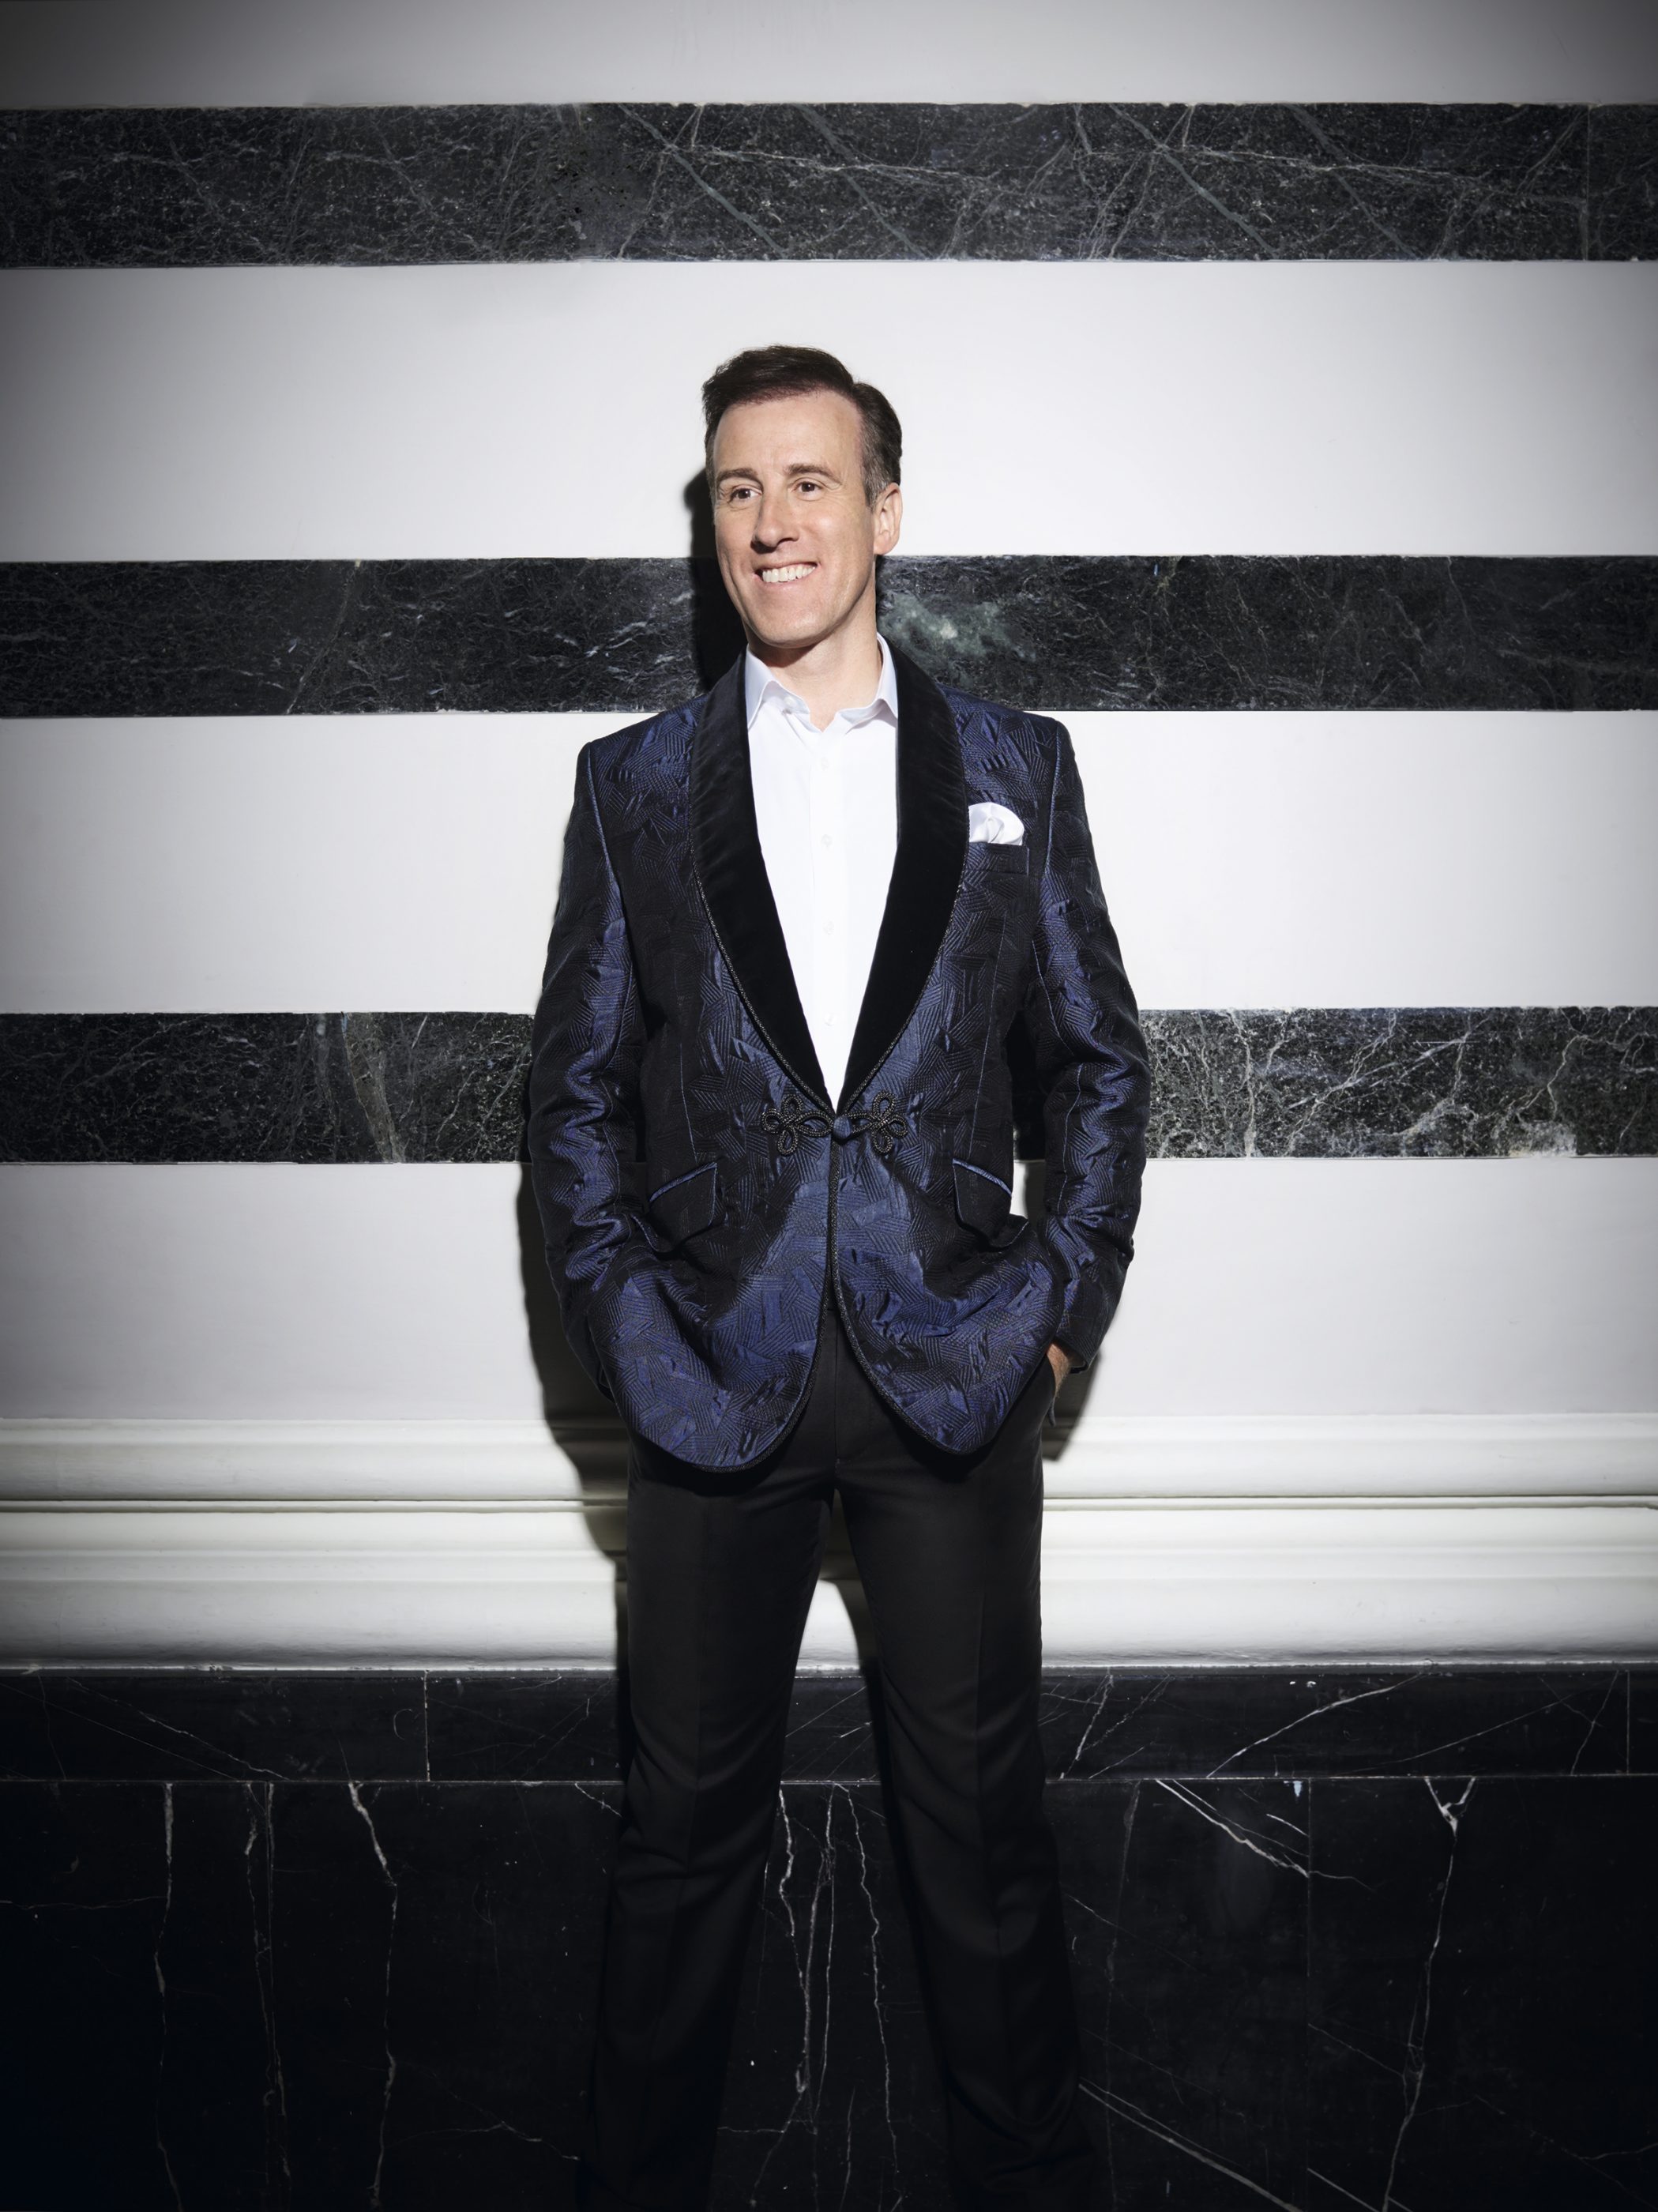 Du Beke in a shiny suit jacket, stood in front of a black and white striped wall.